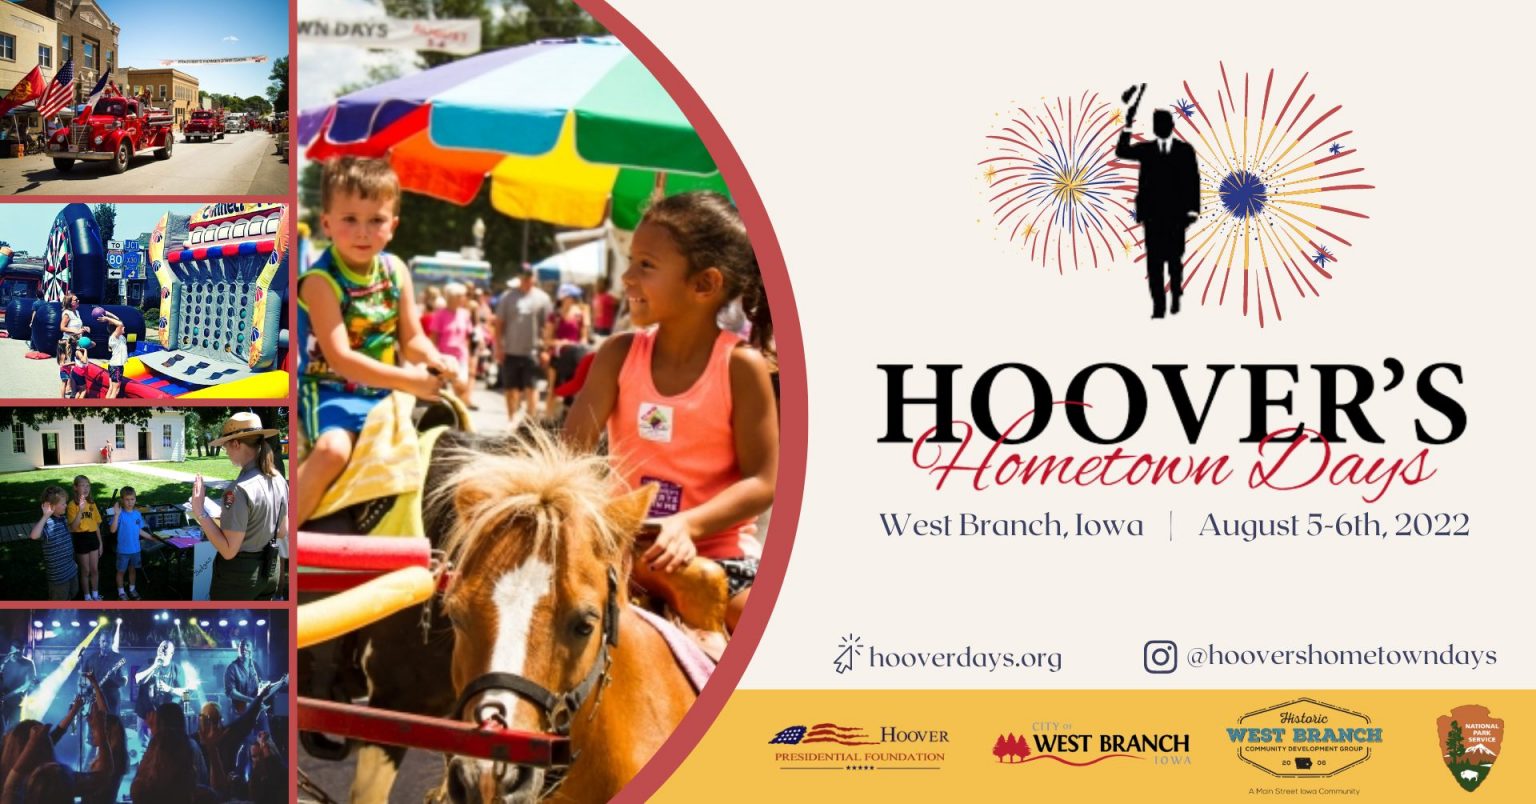 Hoover's Hometown Days Annual Festival in West Branch, Iowa Think